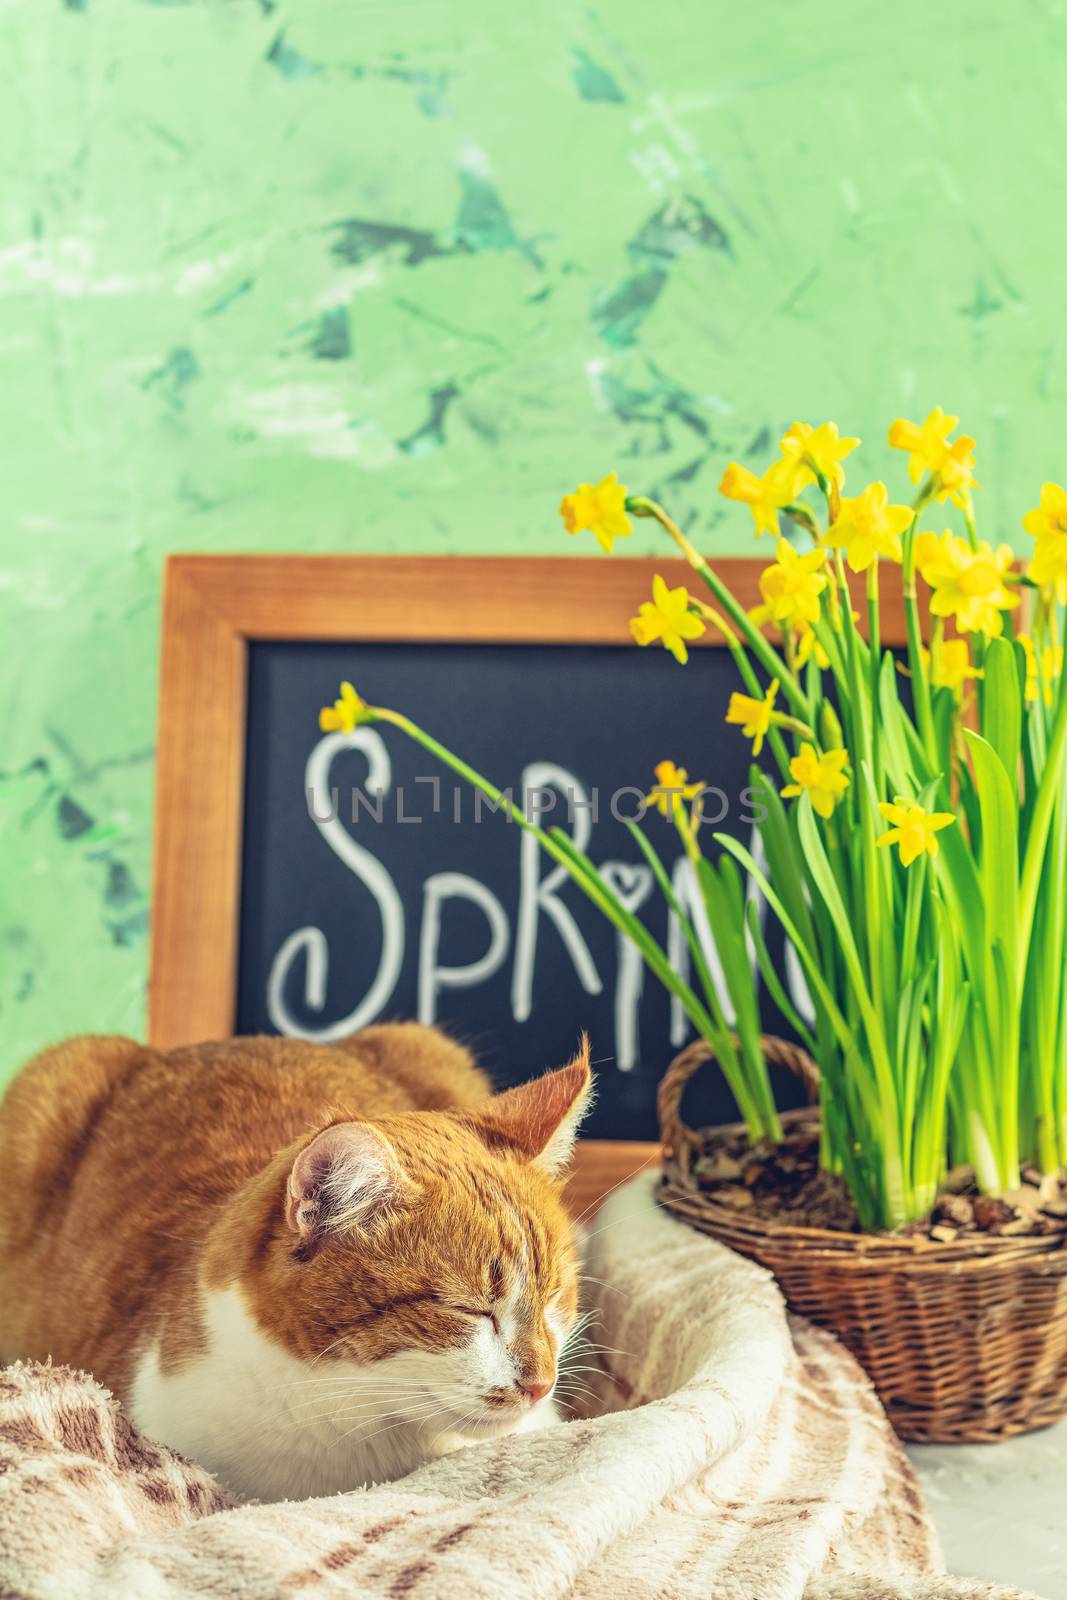 Calligraphic inscription hand lettering letters spring on black chalkboard standing on green concrete surface with yellow blossom narcissus in wicker basket and cute red white cat.